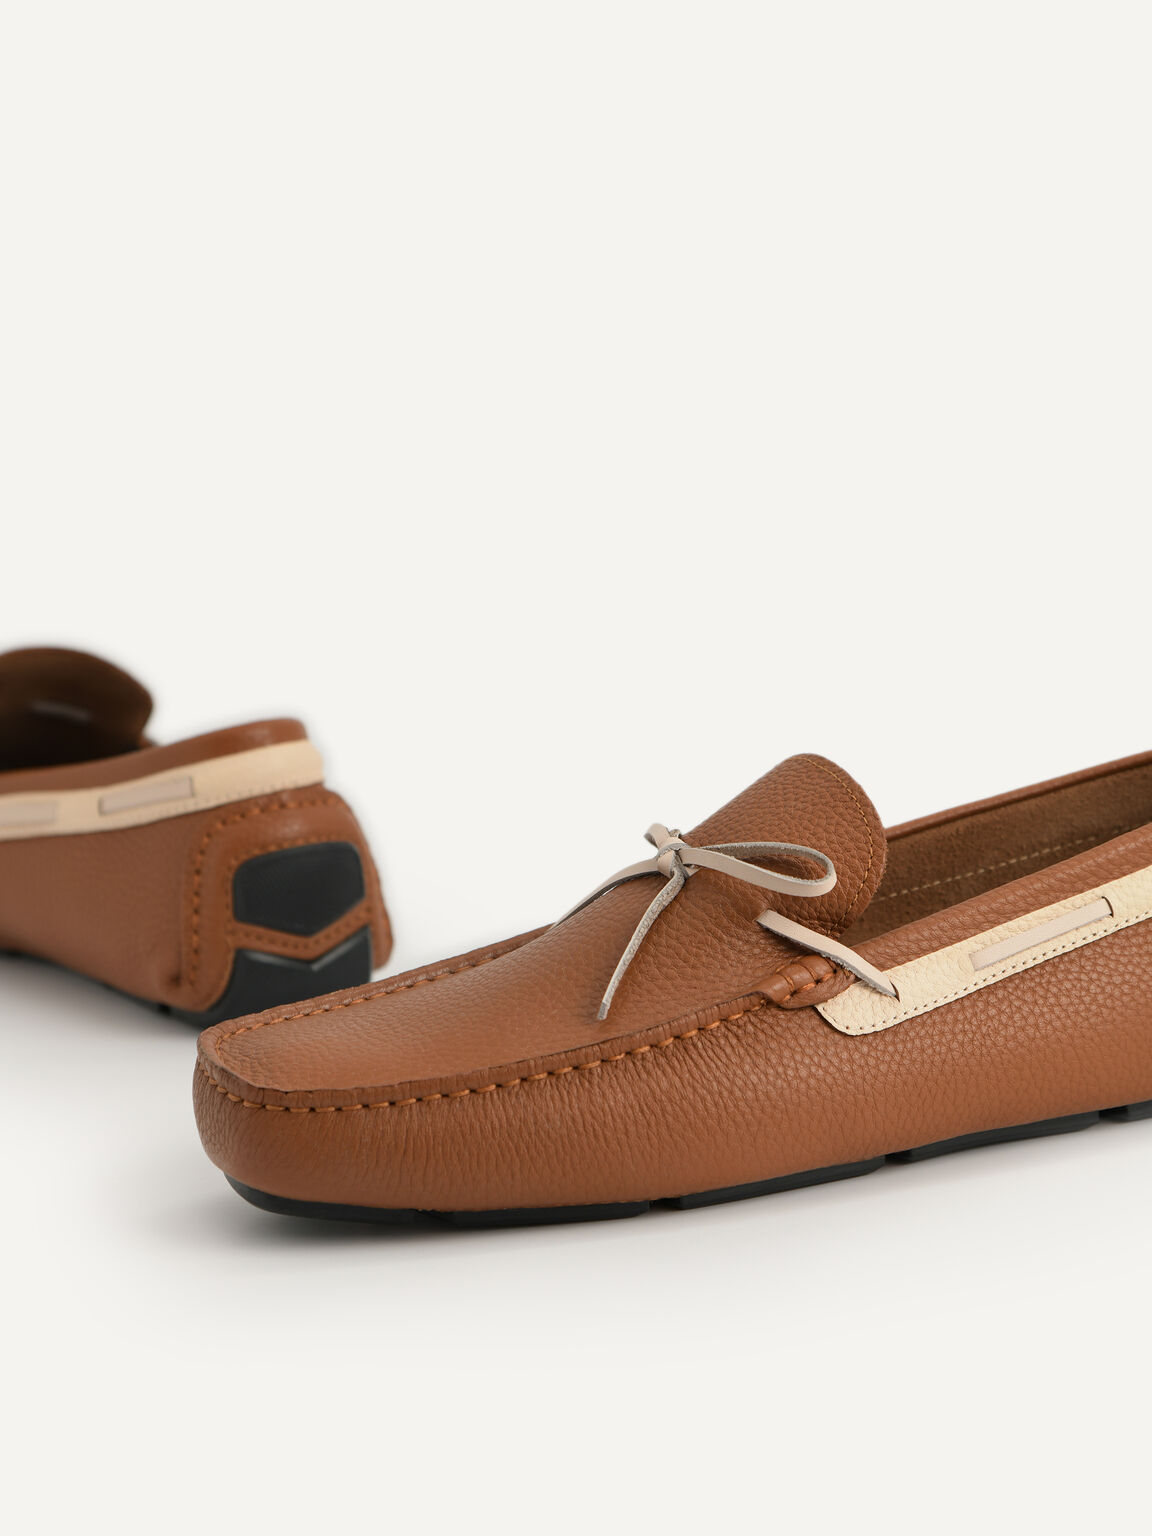 Textured Leather Moccasins with Bow, Brown